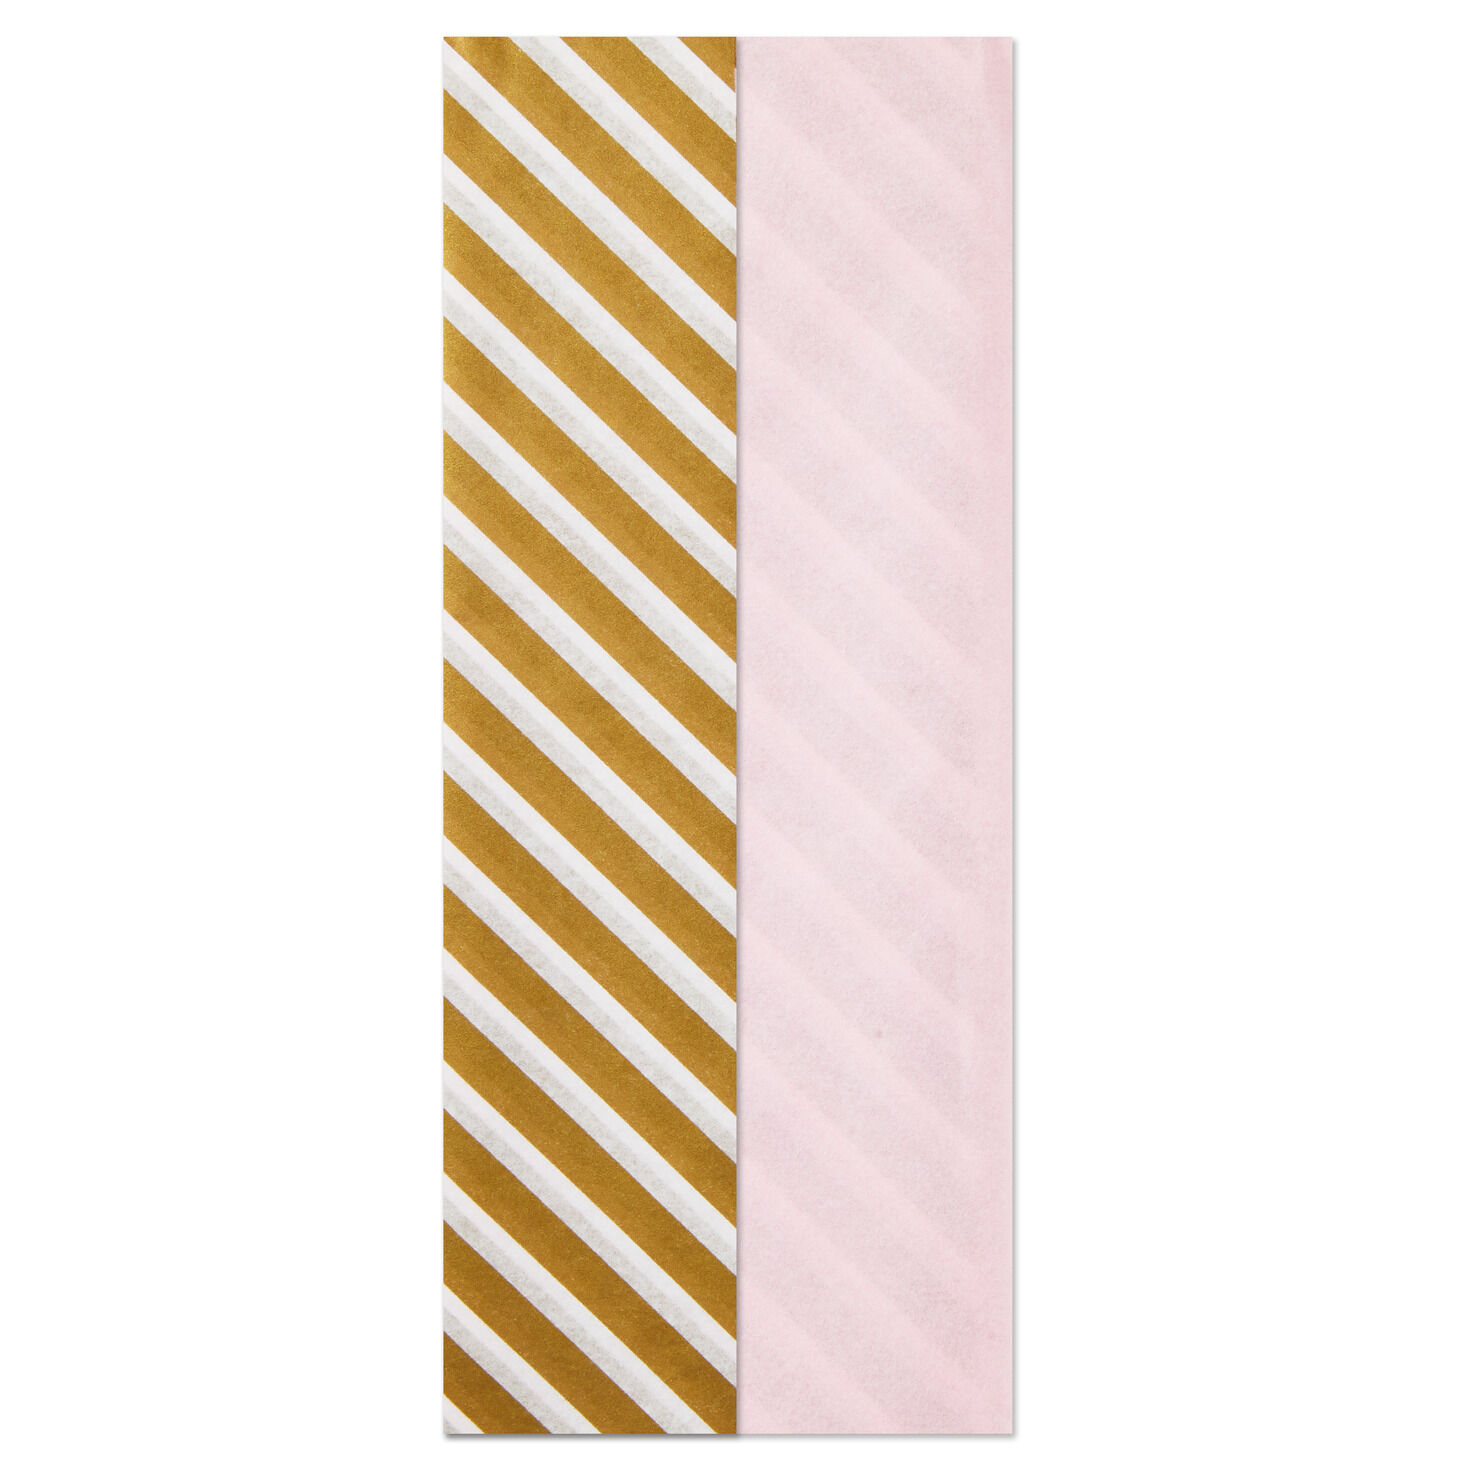 Light Pink and Gold Stripe 2-Pack Tissue Paper, 4 Sheets for only USD 2.49 | Hallmark